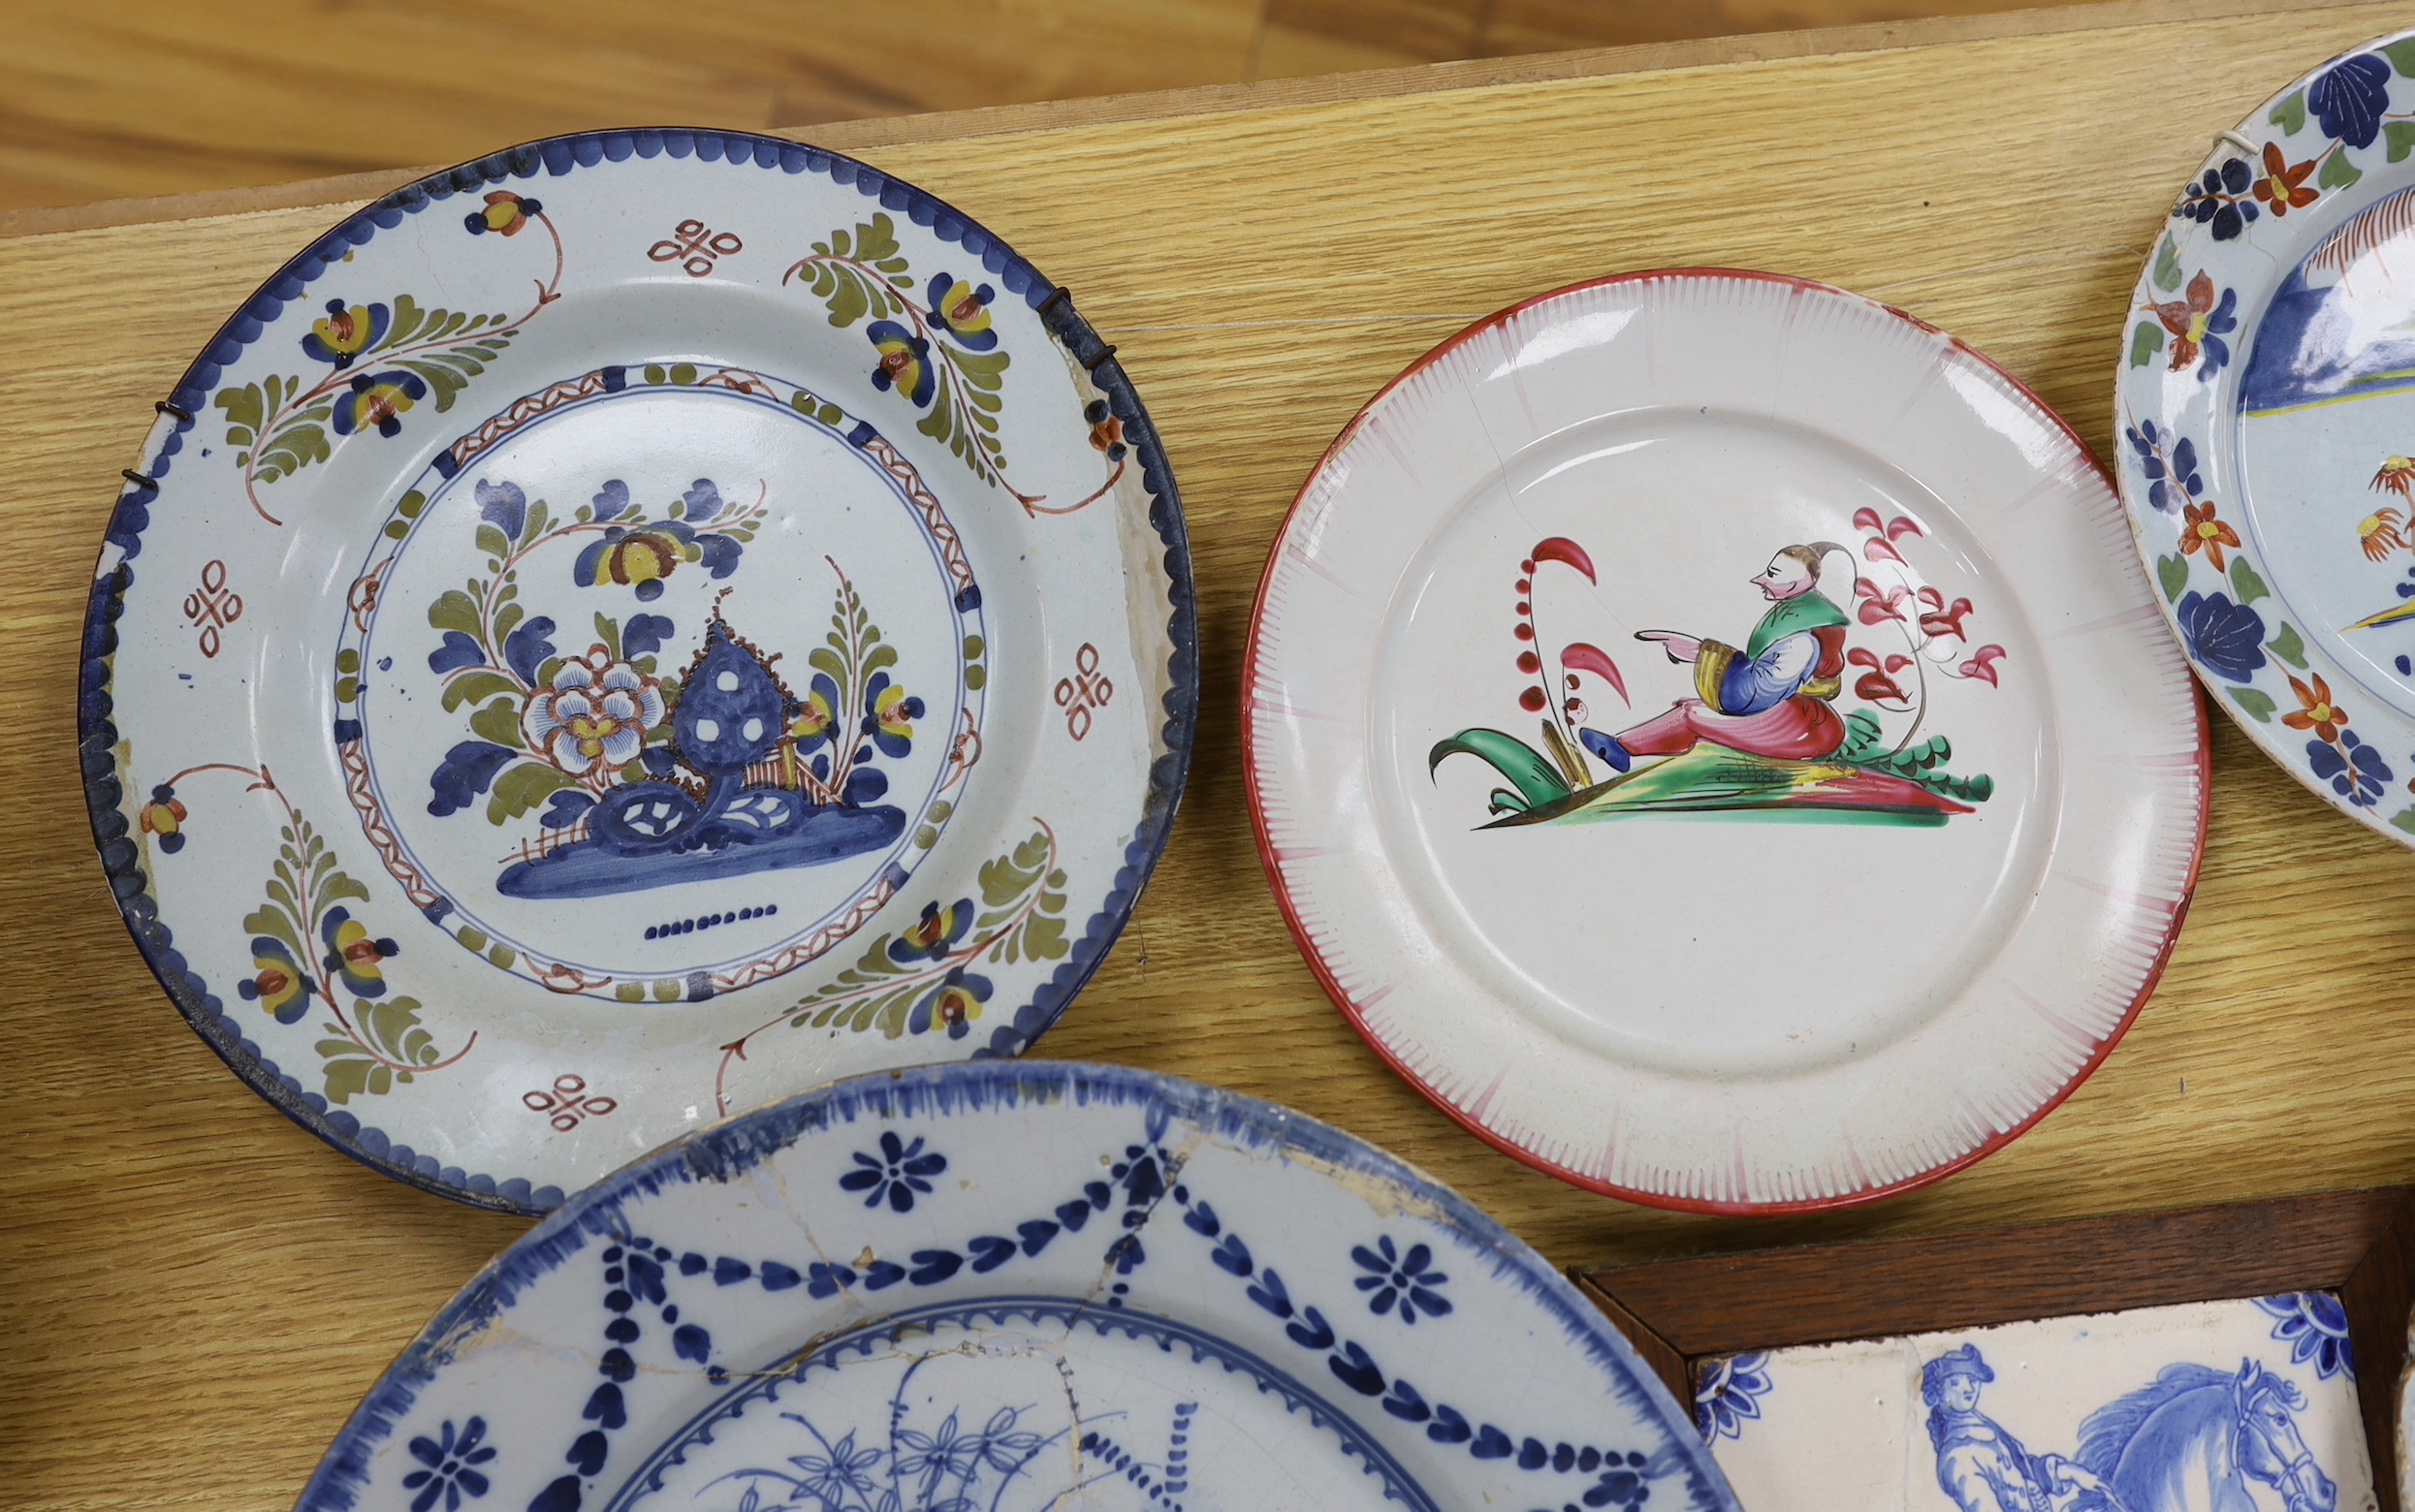 Two 18th century Delft blue and white dishes, a Delft polychrome dish, an English delftware plate, a Delft equestrian tile and a French faience plate, a.f., largest diameter 35cm